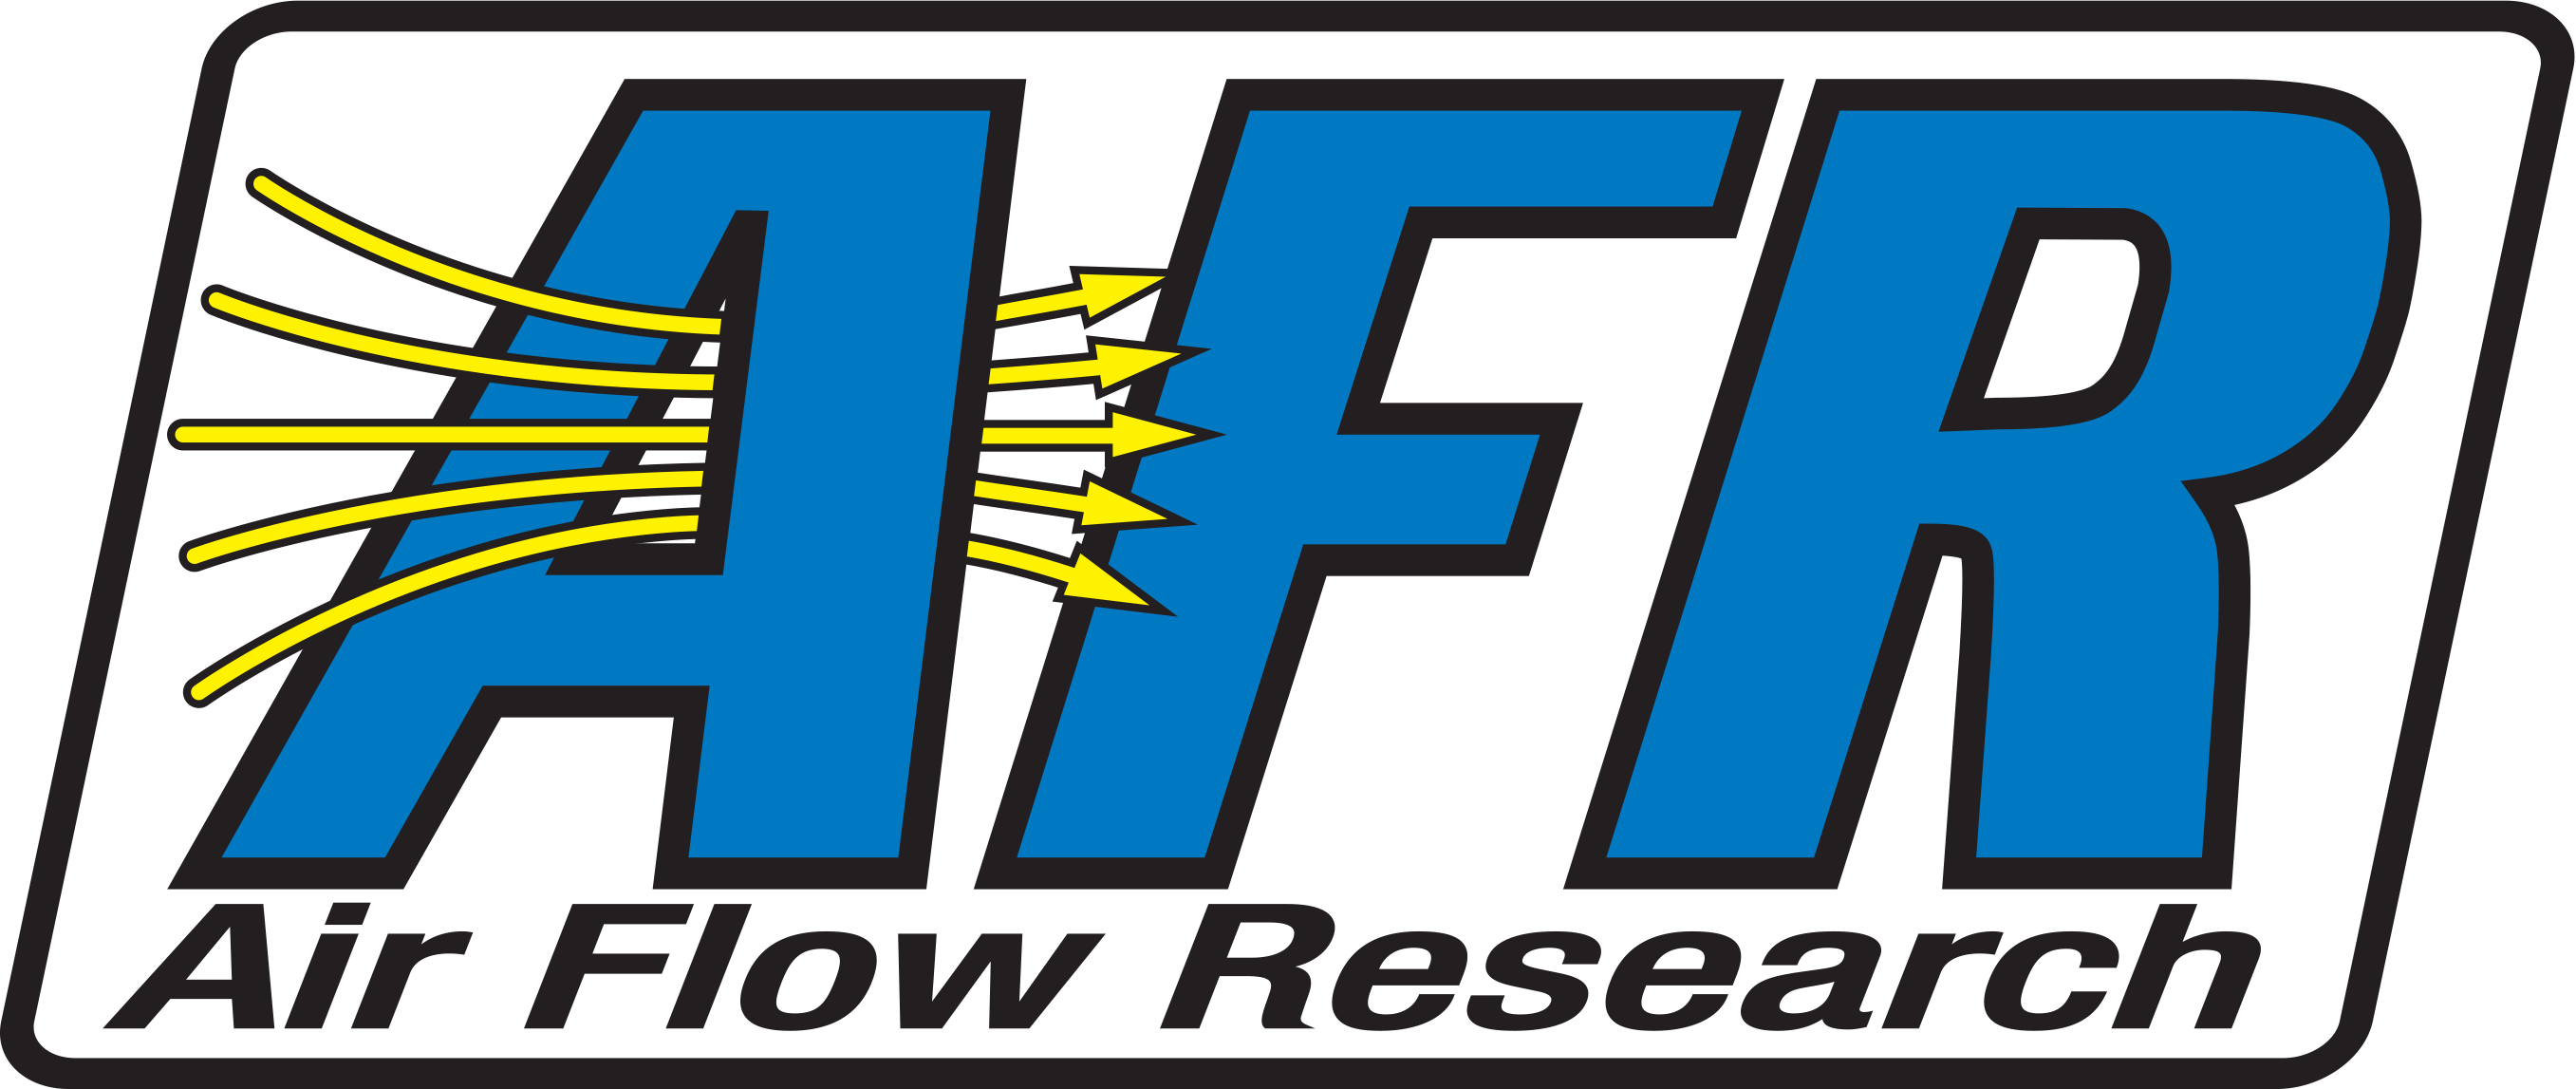 Air Flow Research (9720) Apparel/Promotional